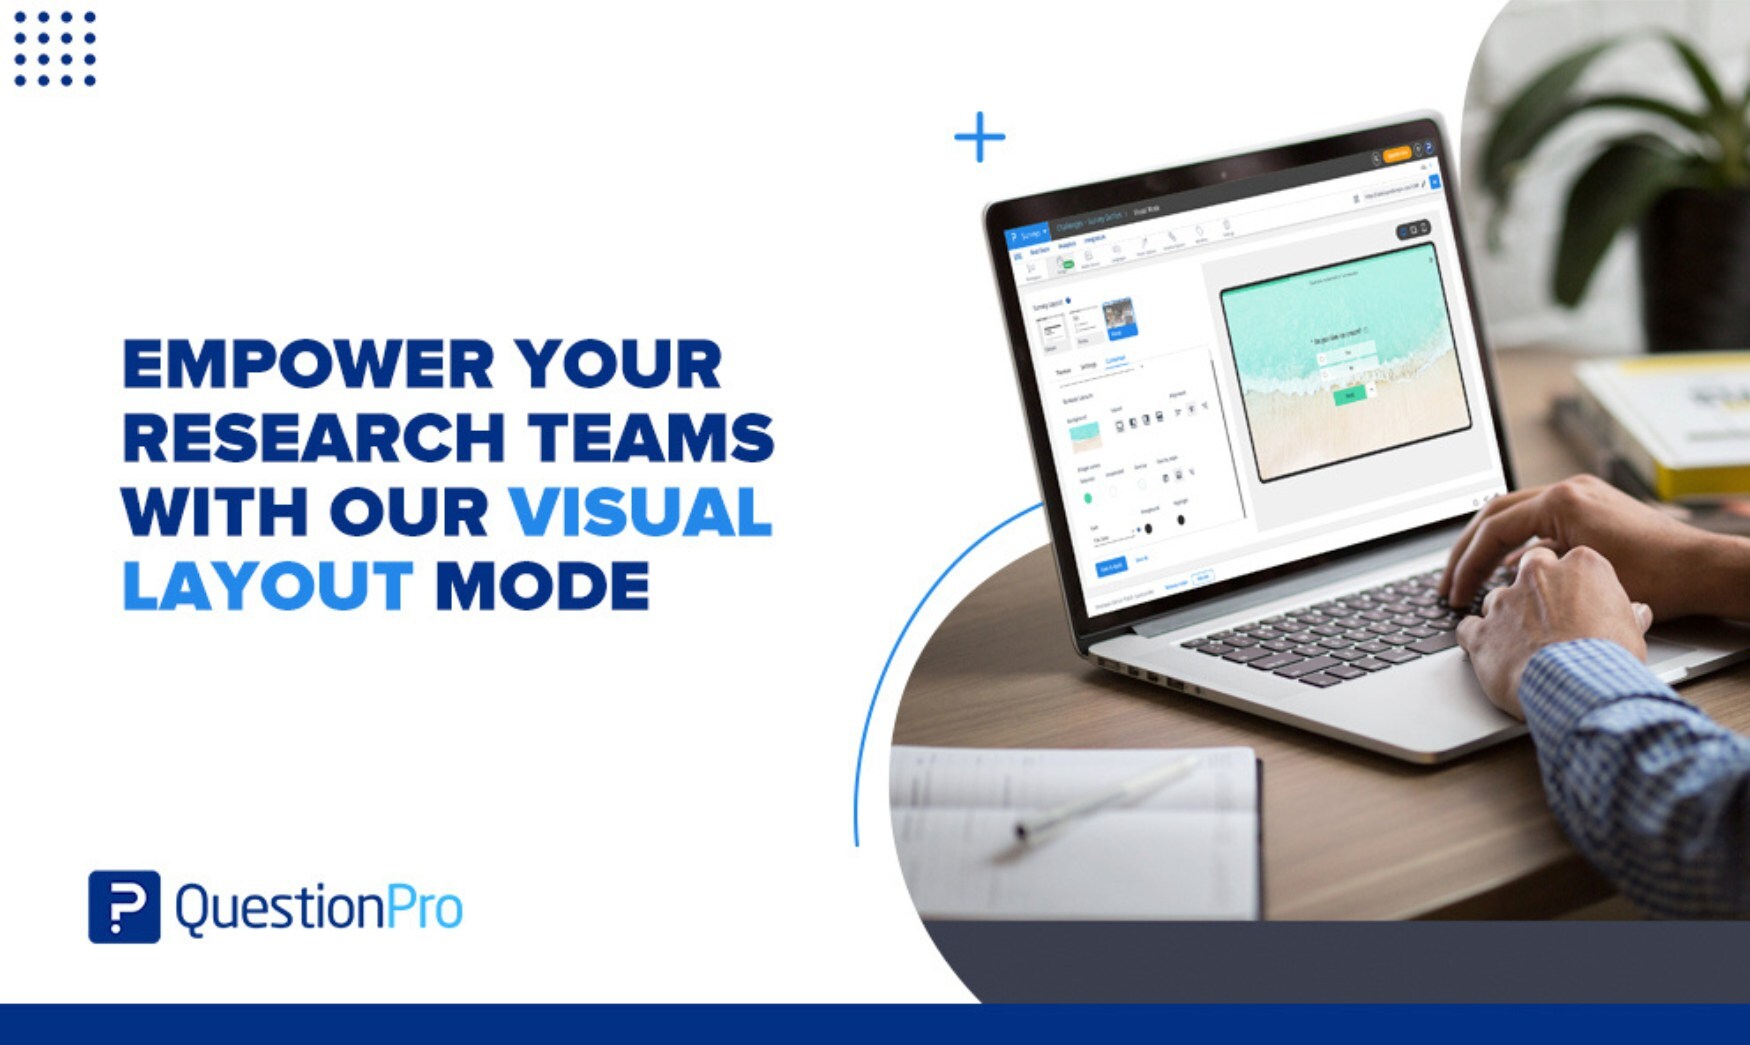 Here is how you can empower your research teams with visual layout for enhanced survey responses and deeper insights.